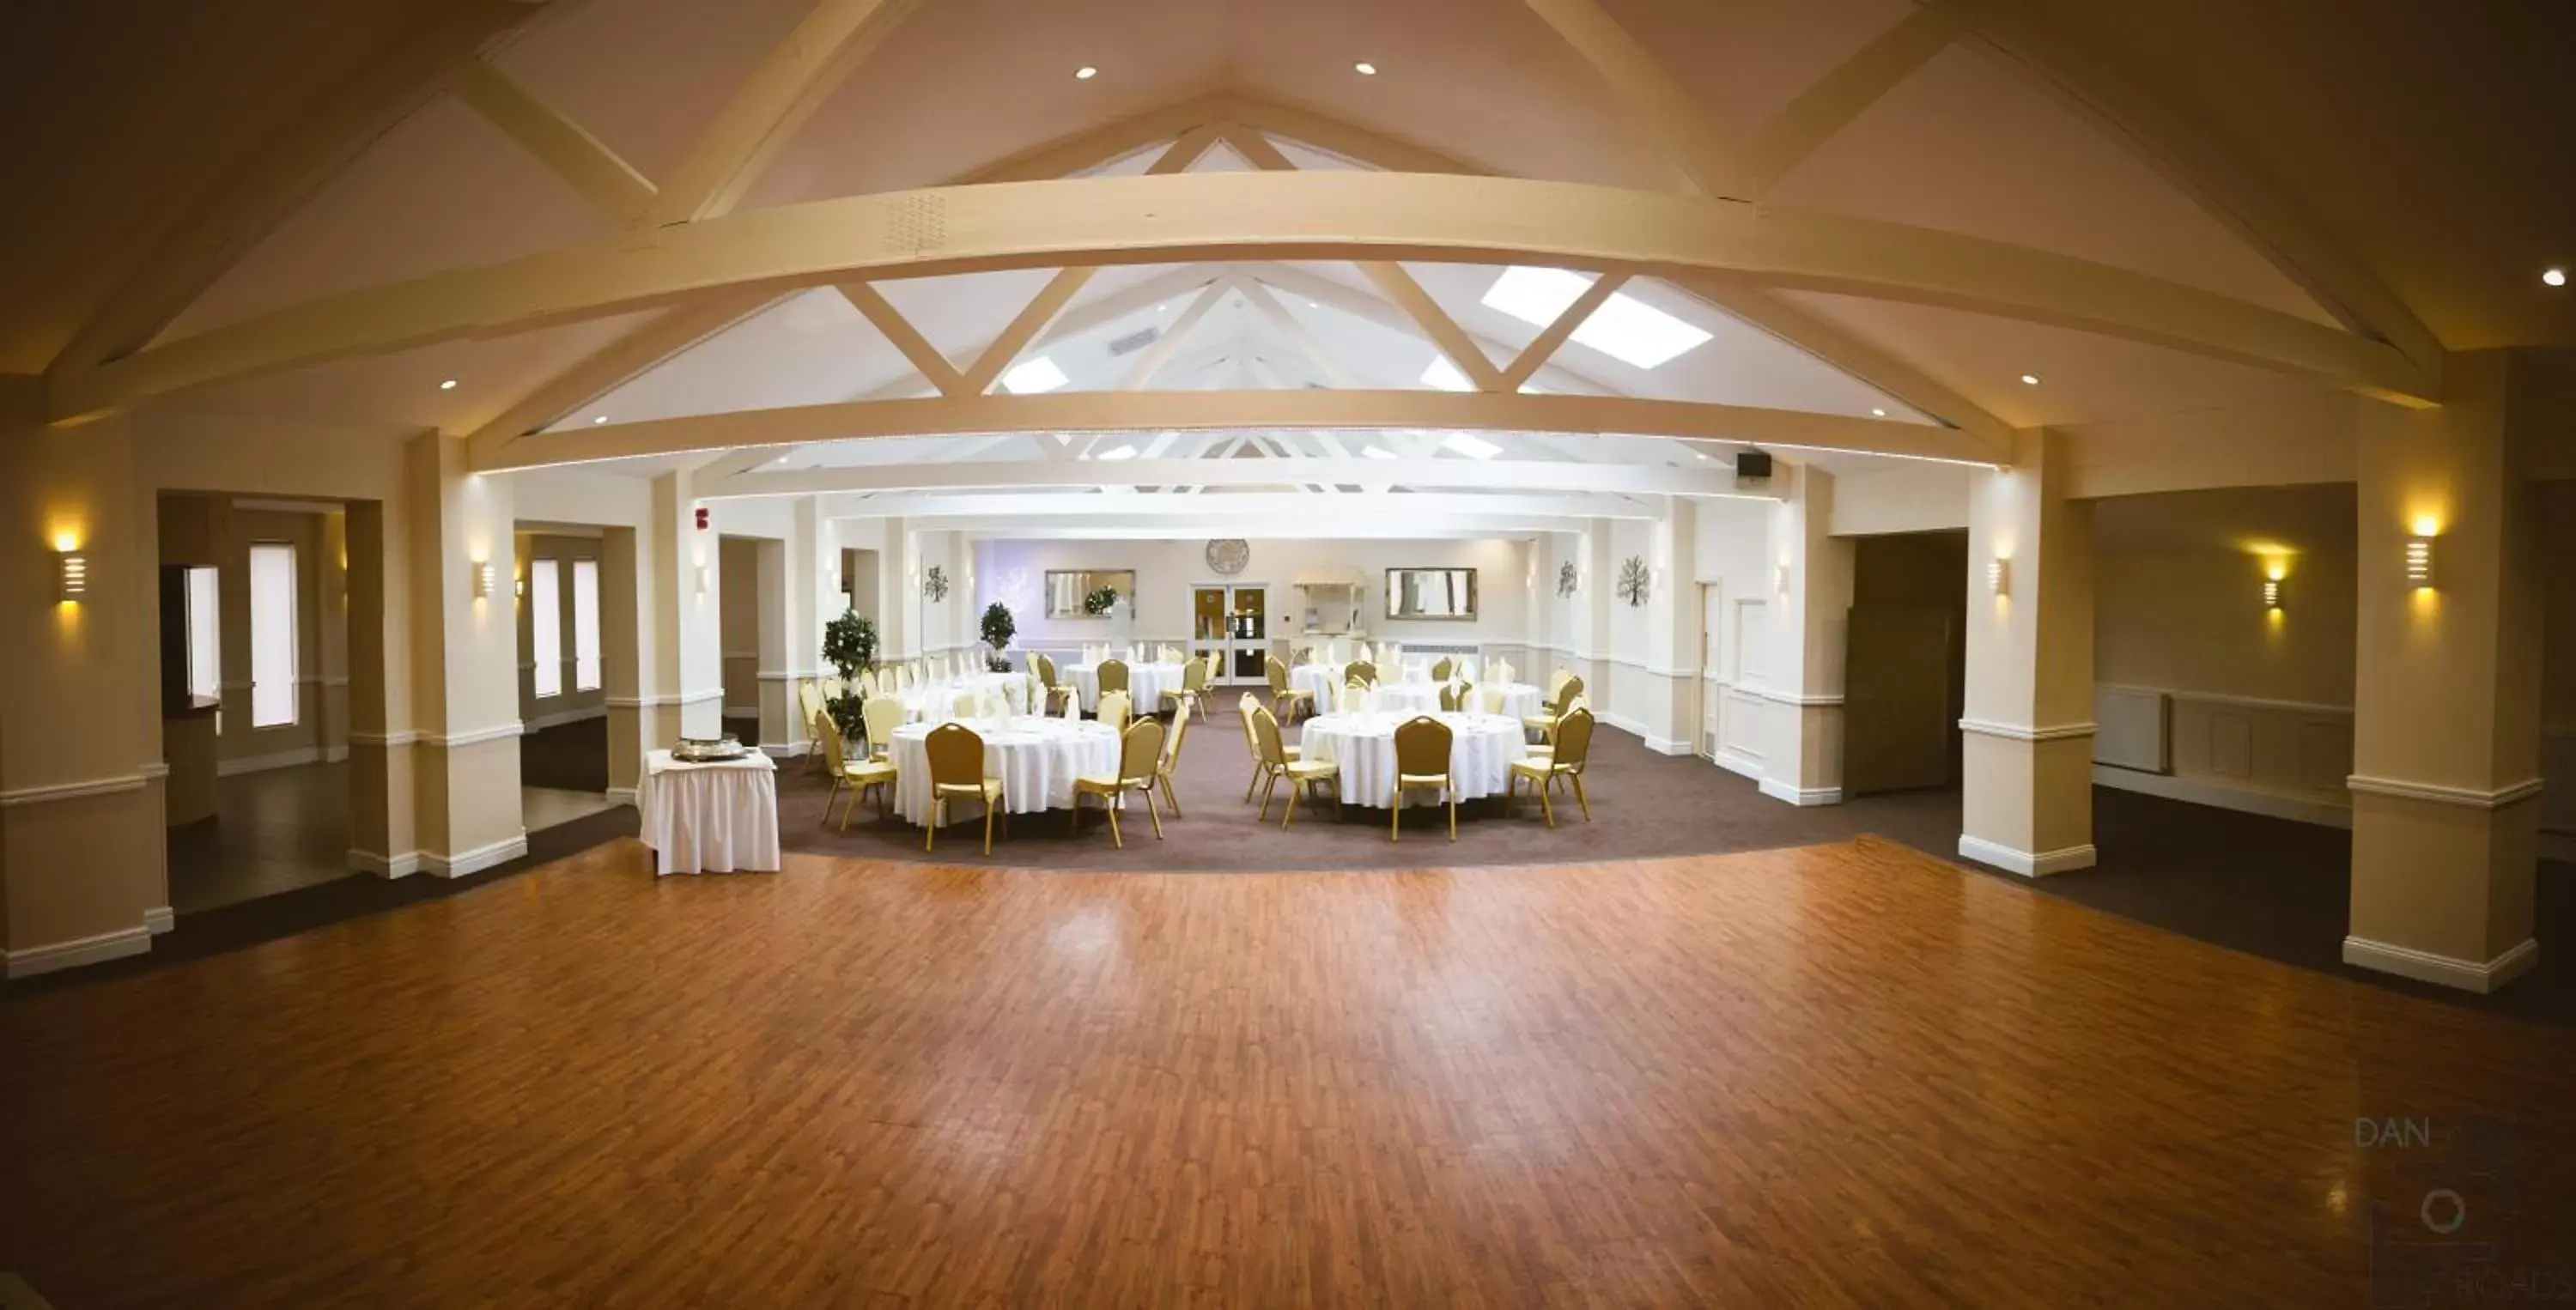 Banquet/Function facilities, Banquet Facilities in Best Western Weymouth Hotel Rembrandt